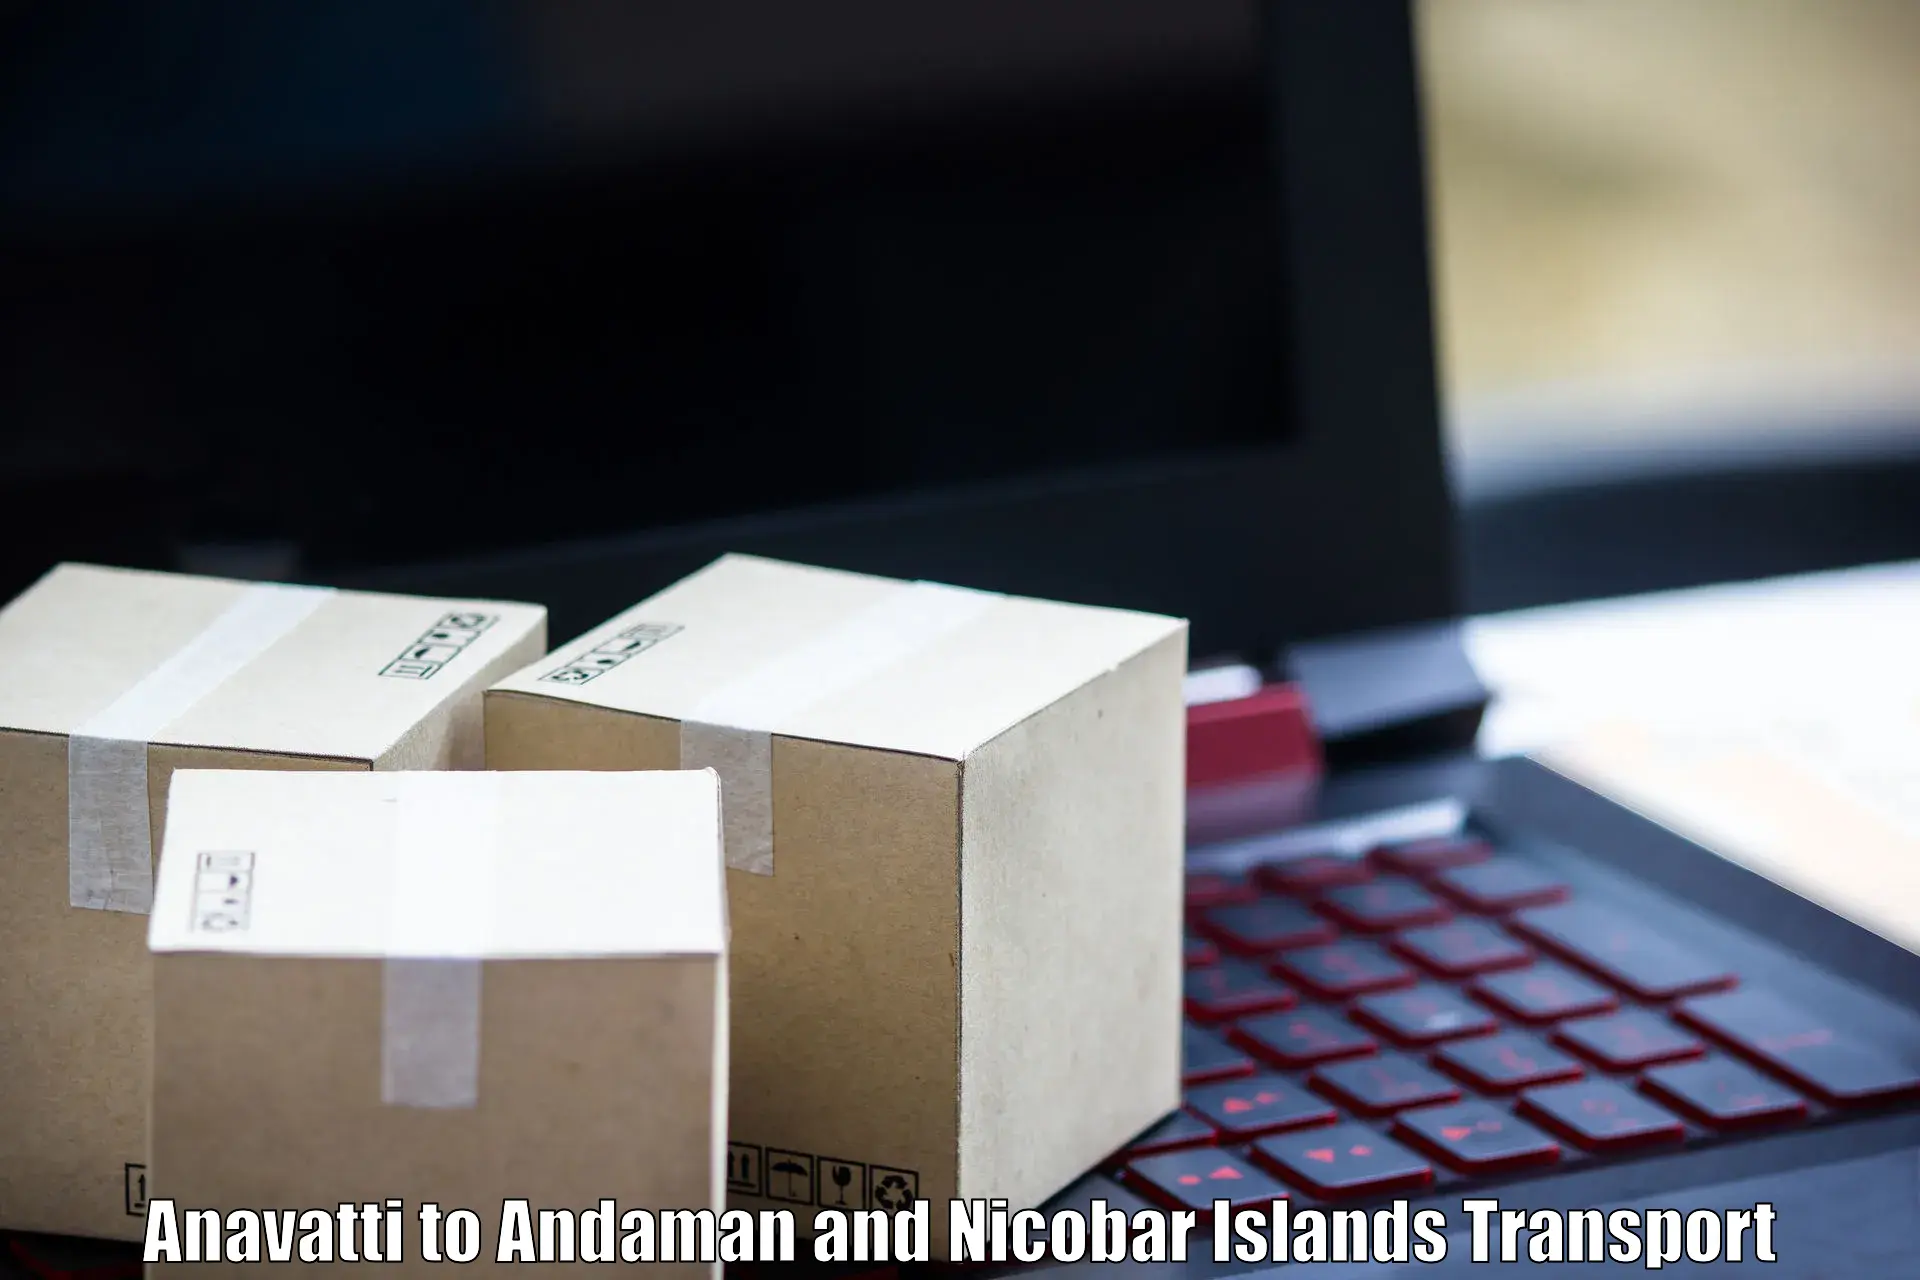 Transport shared services Anavatti to Andaman and Nicobar Islands